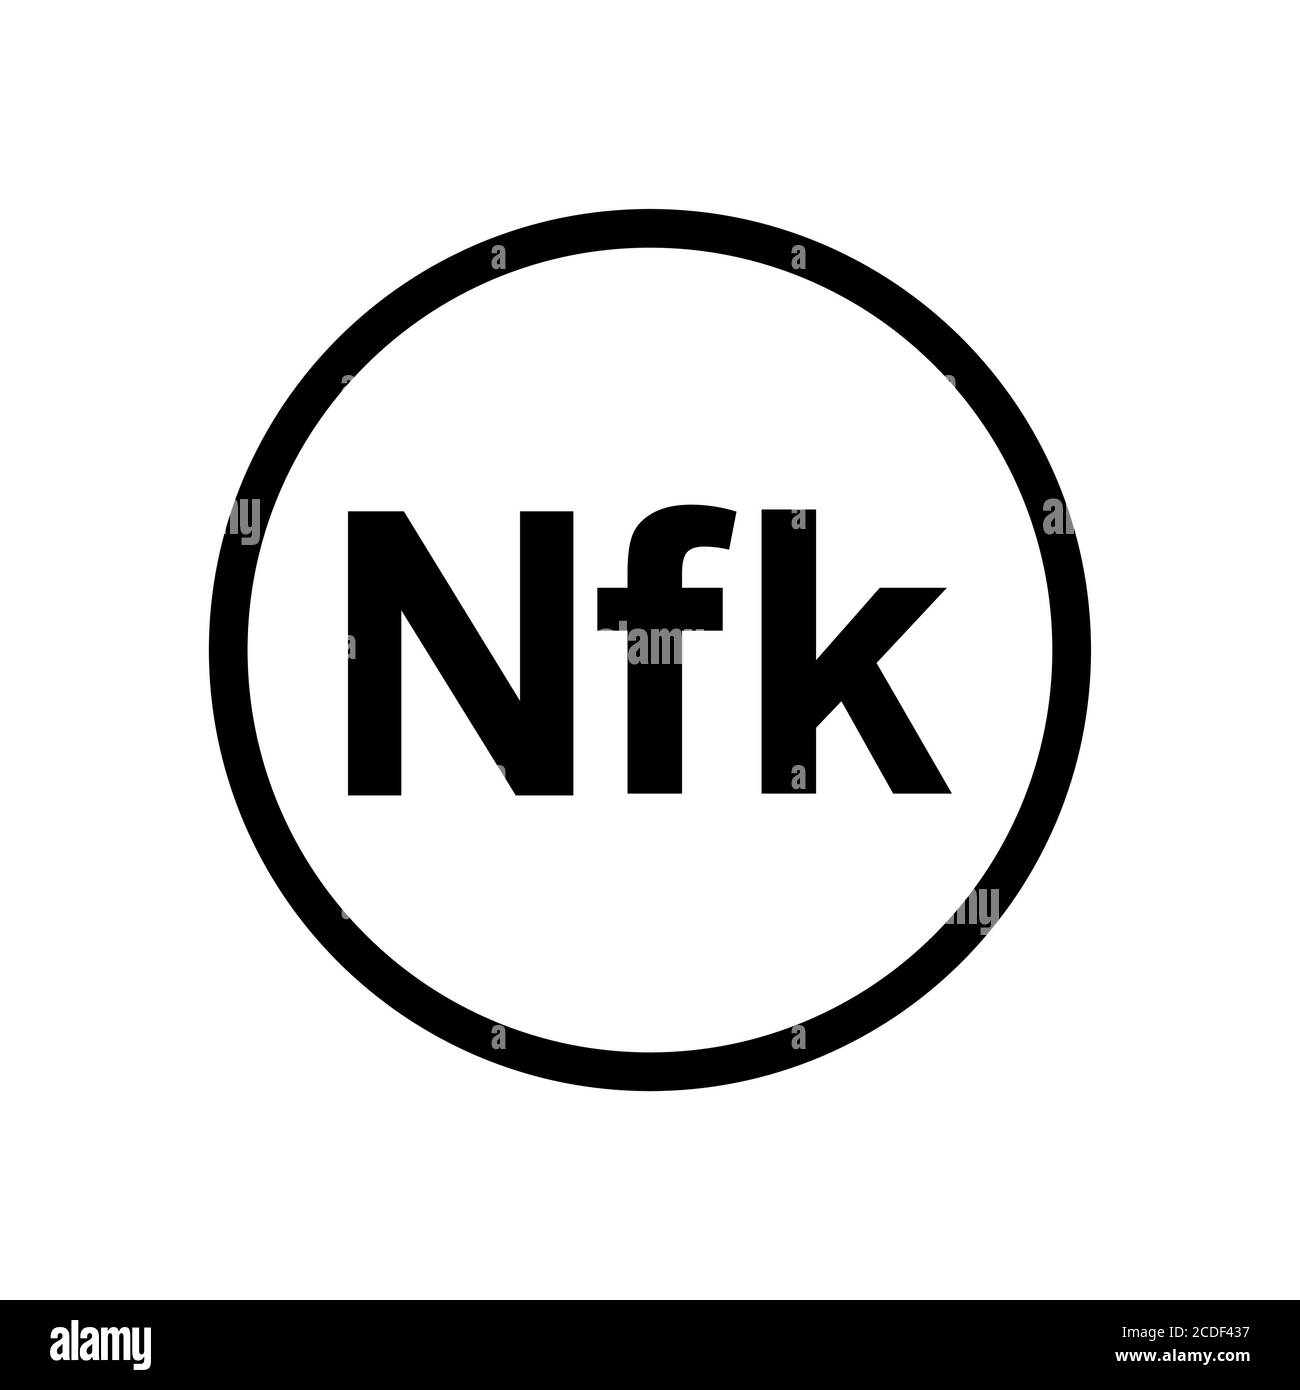 Nakfa coin monochrome black and white icon. Current currency symbol. Stock Vector